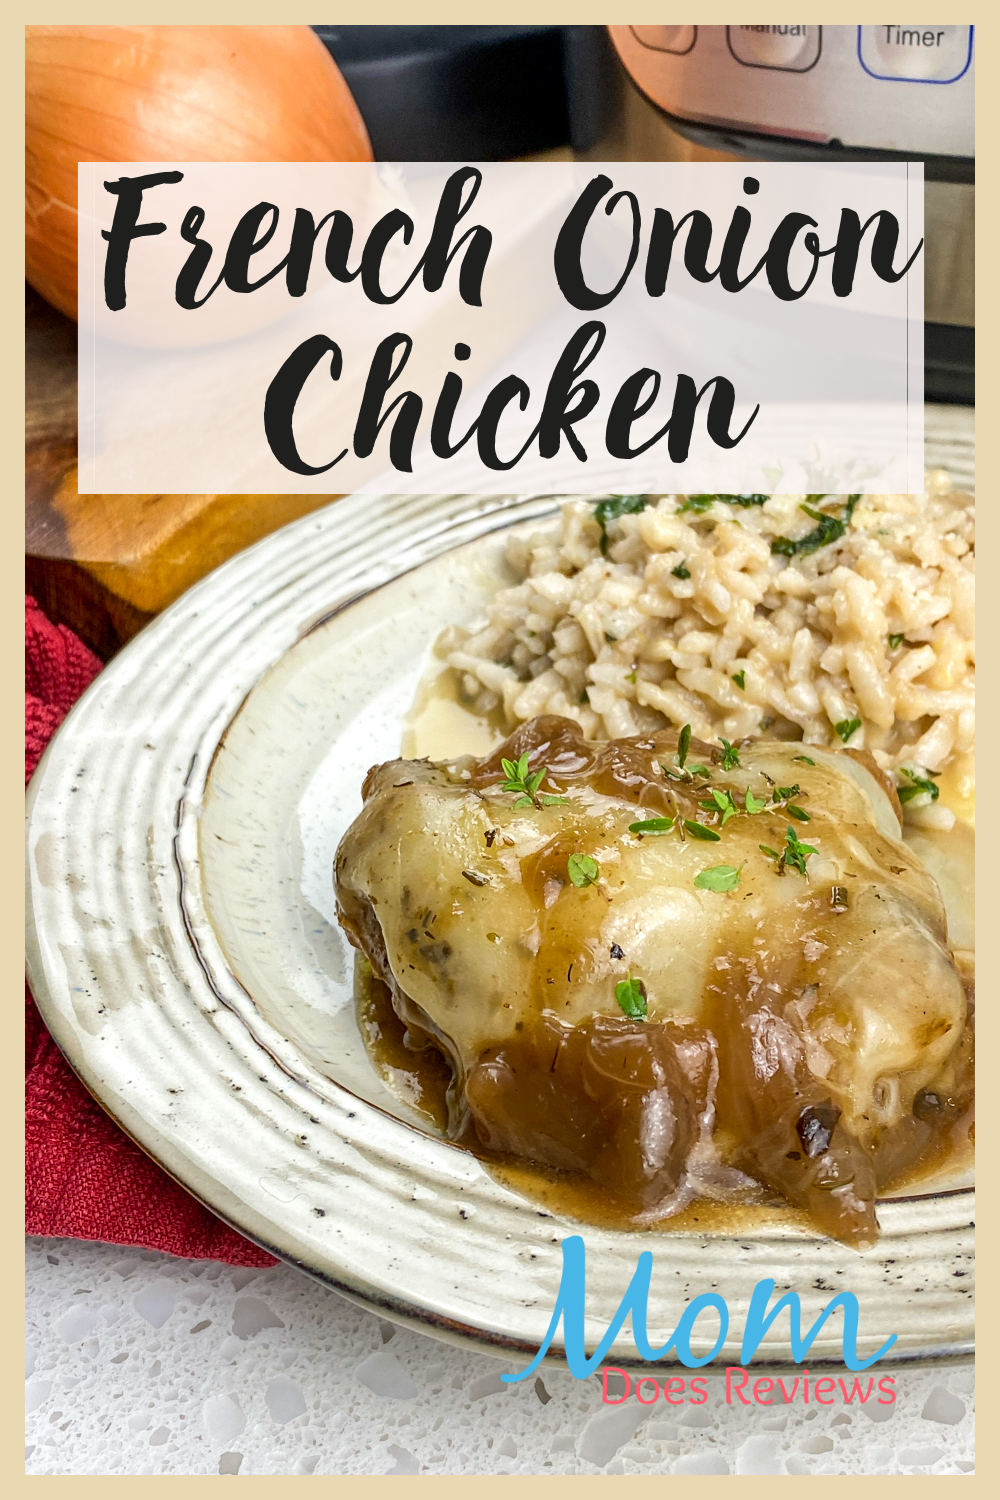 nstant Pot® French Onion Chicken